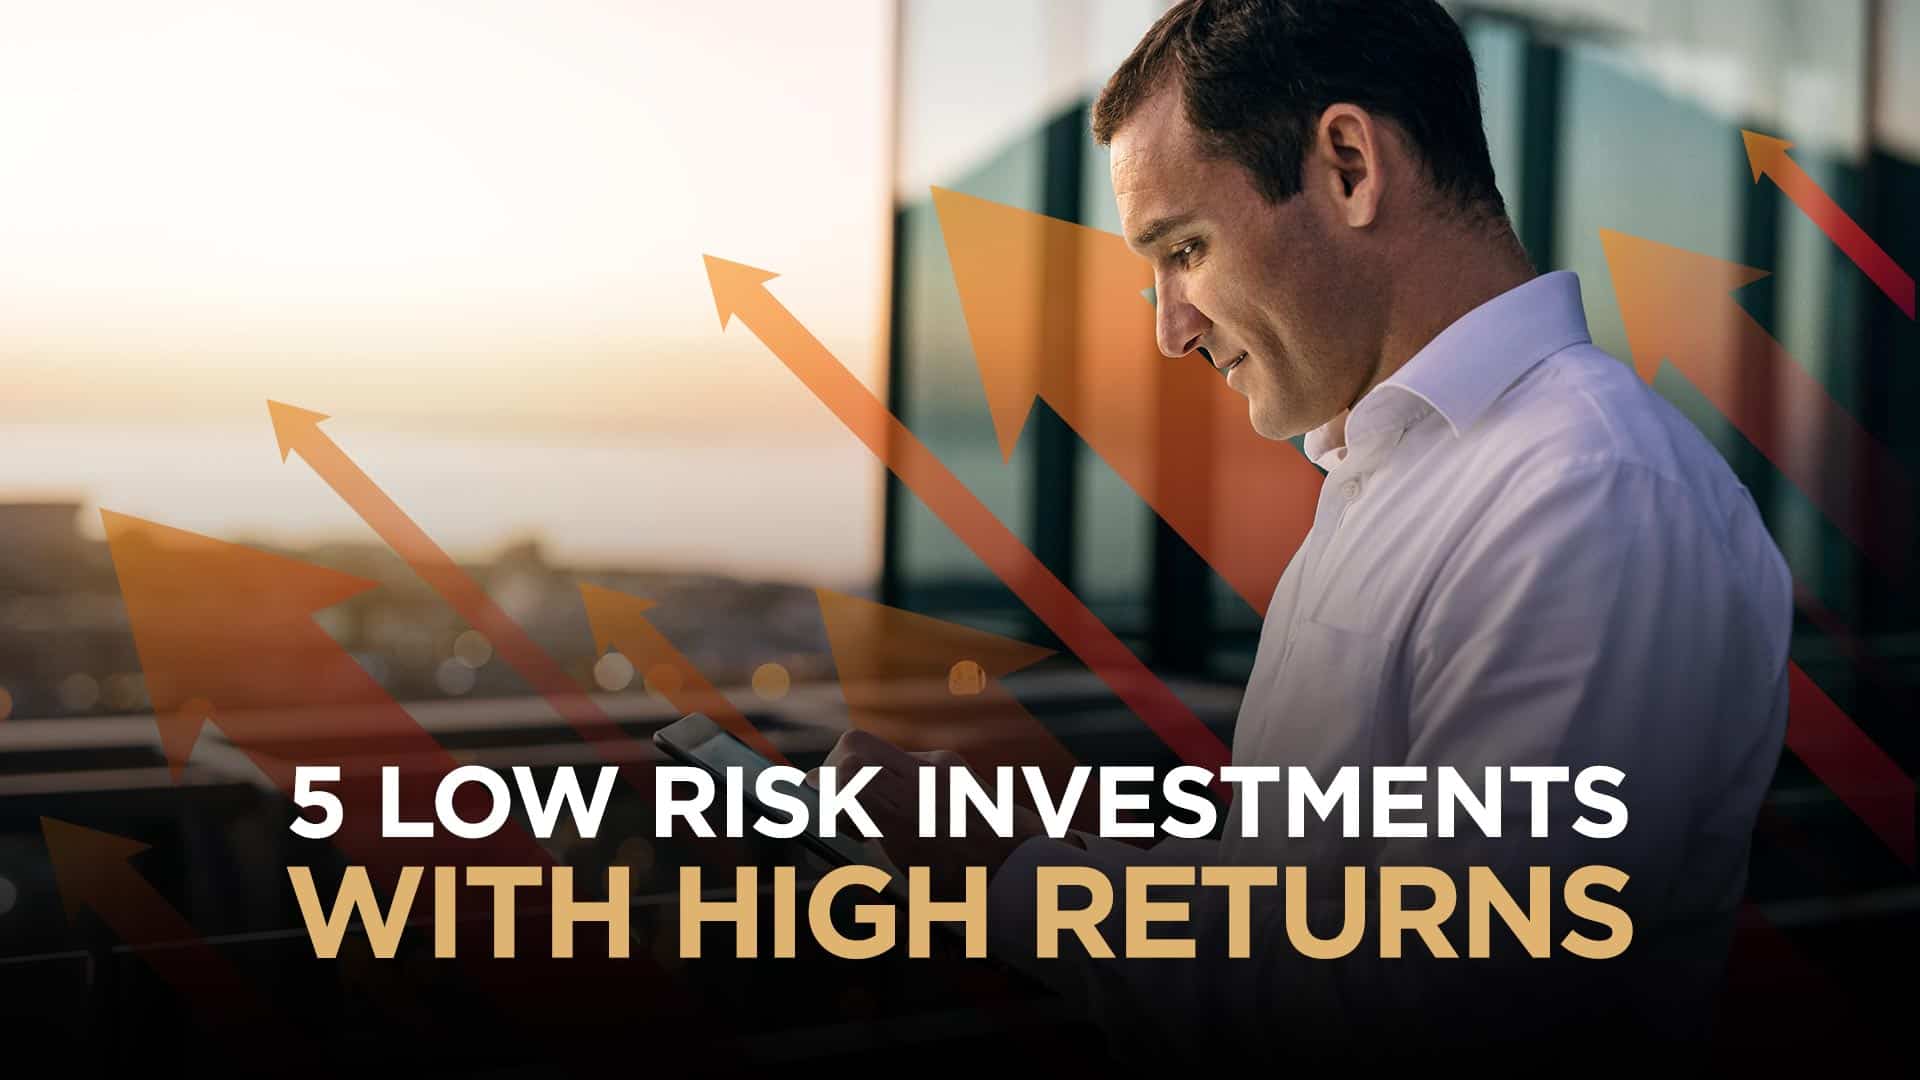 High Return Investments That Can Make A Fortune With Low Risk